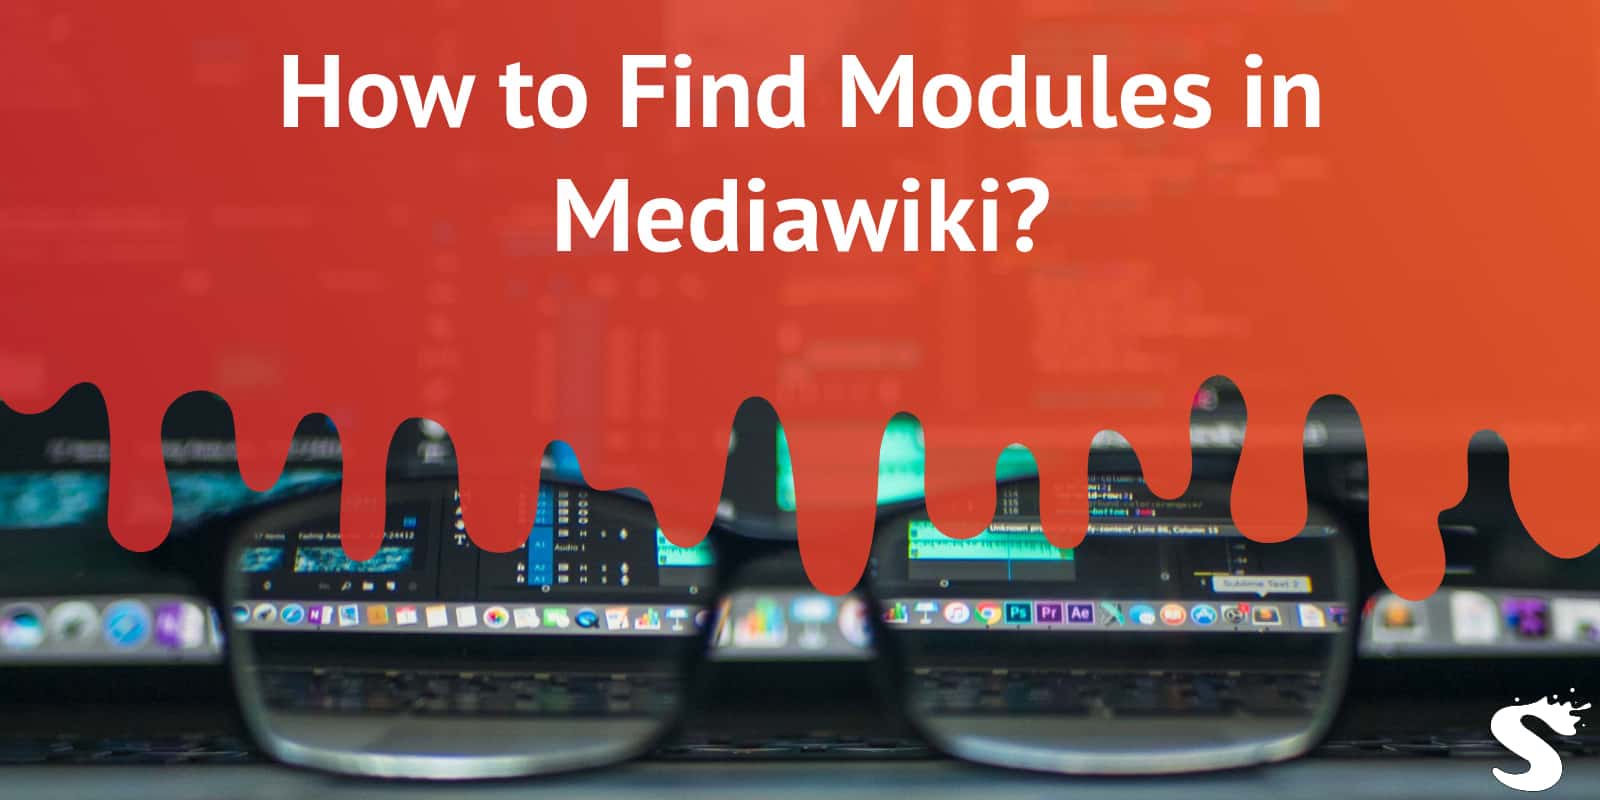 How to Find Modules in Mediawiki?